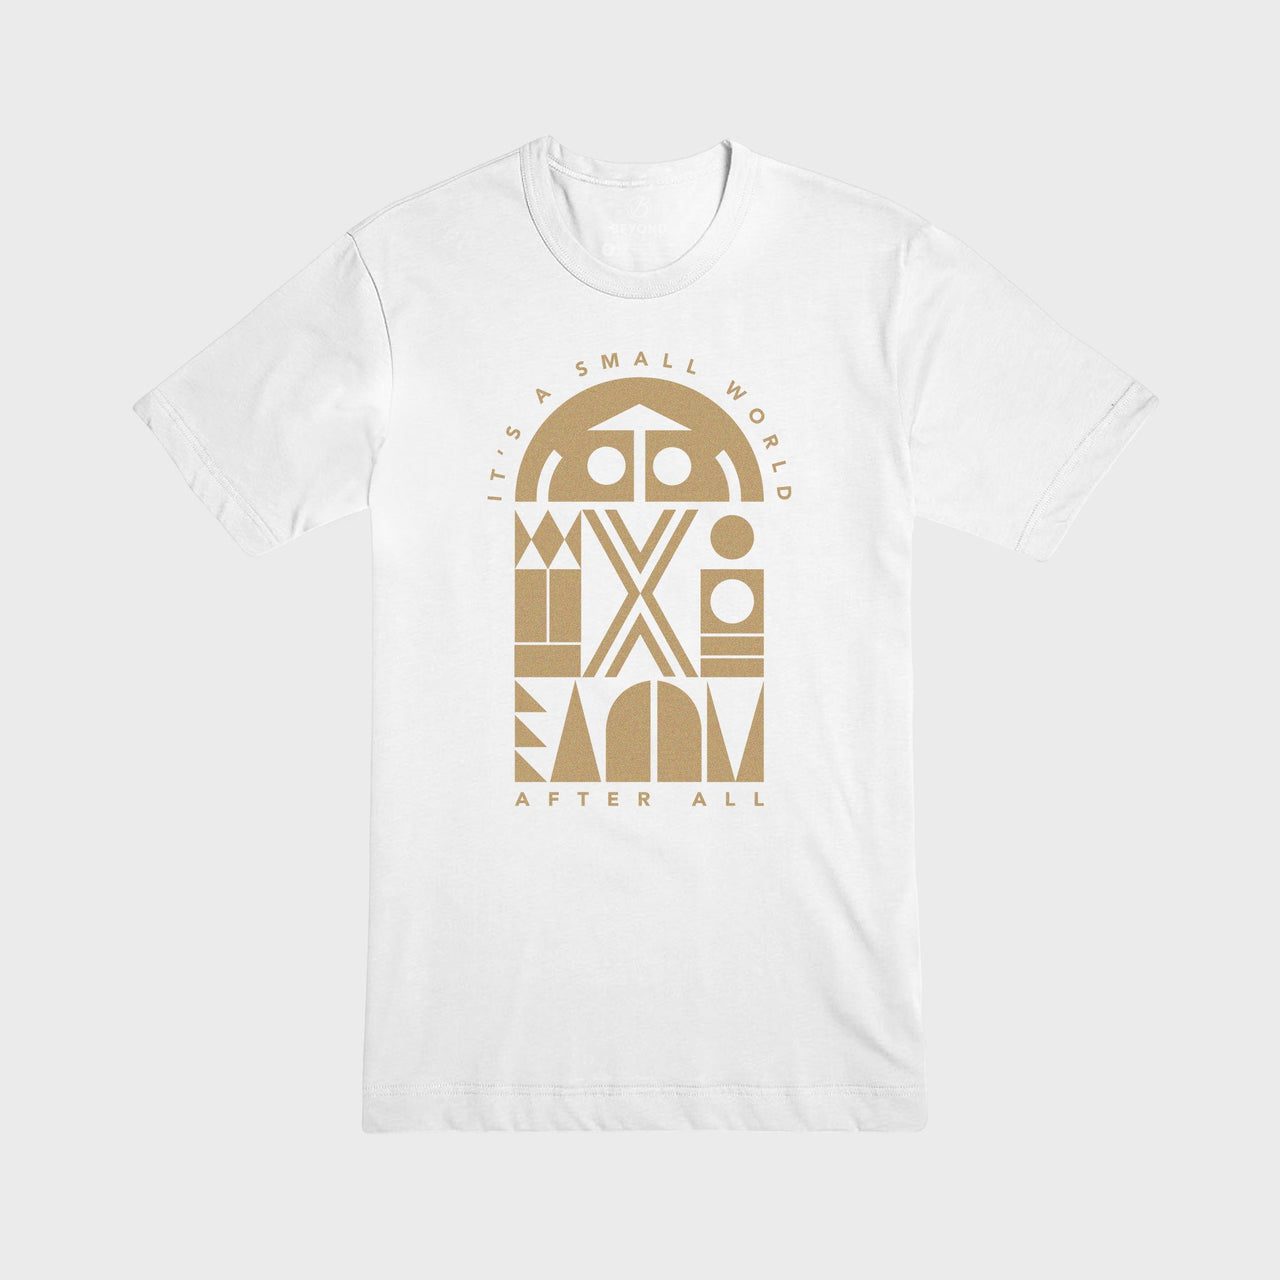 SMALL WORLD | Tee | White/Gold